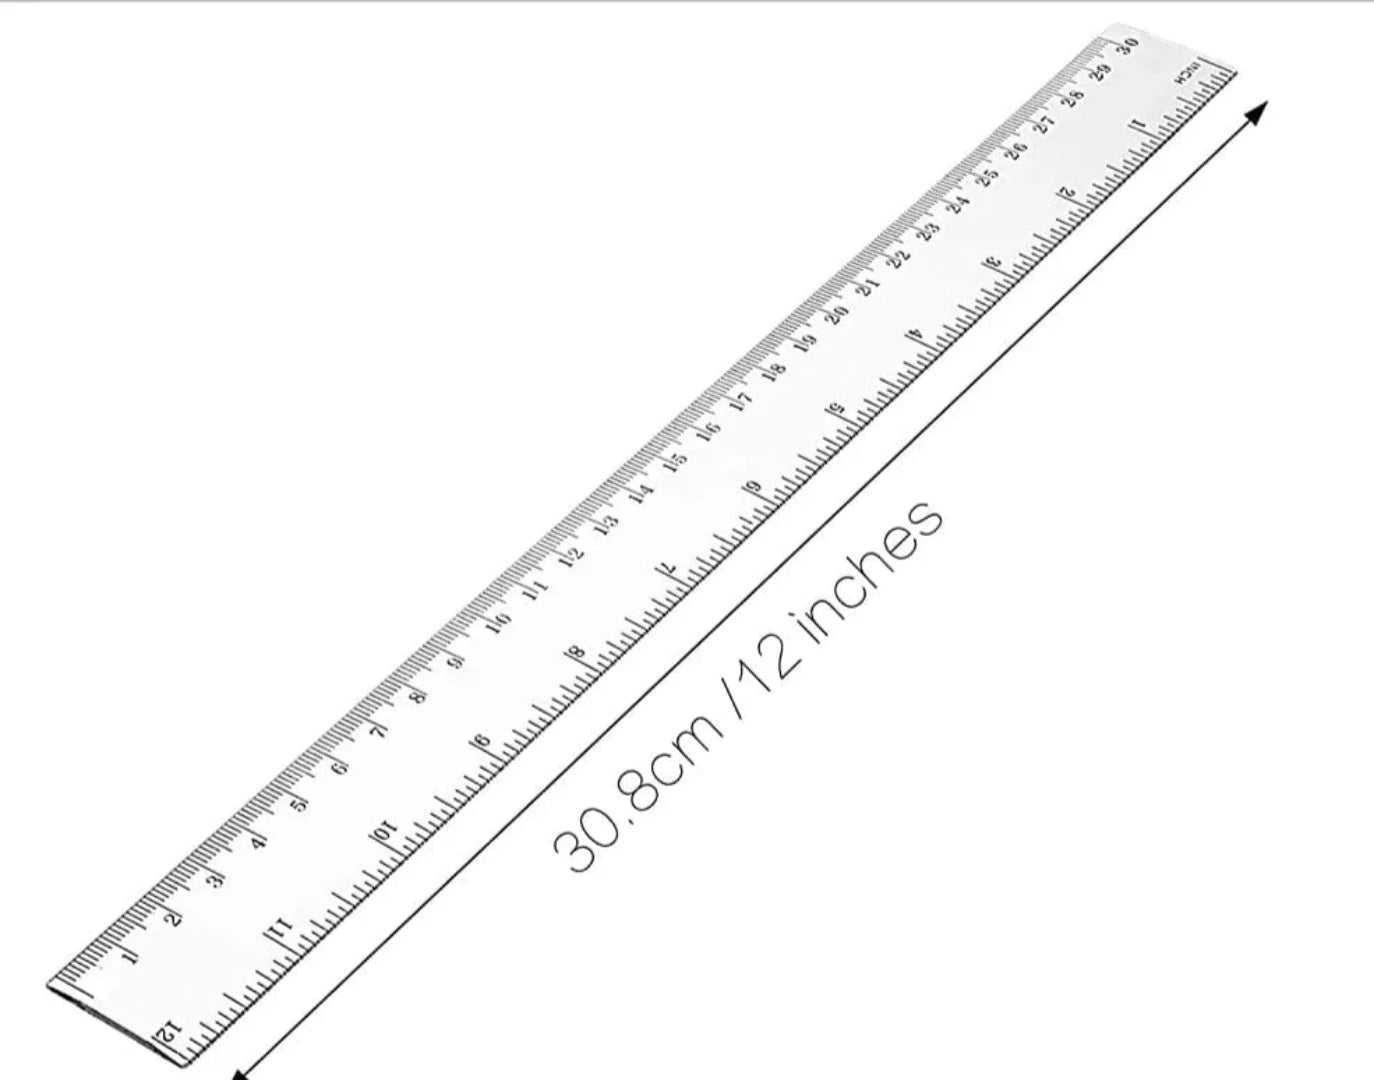 Small Plastic Rulers in 15cm length are made from white plastic and co